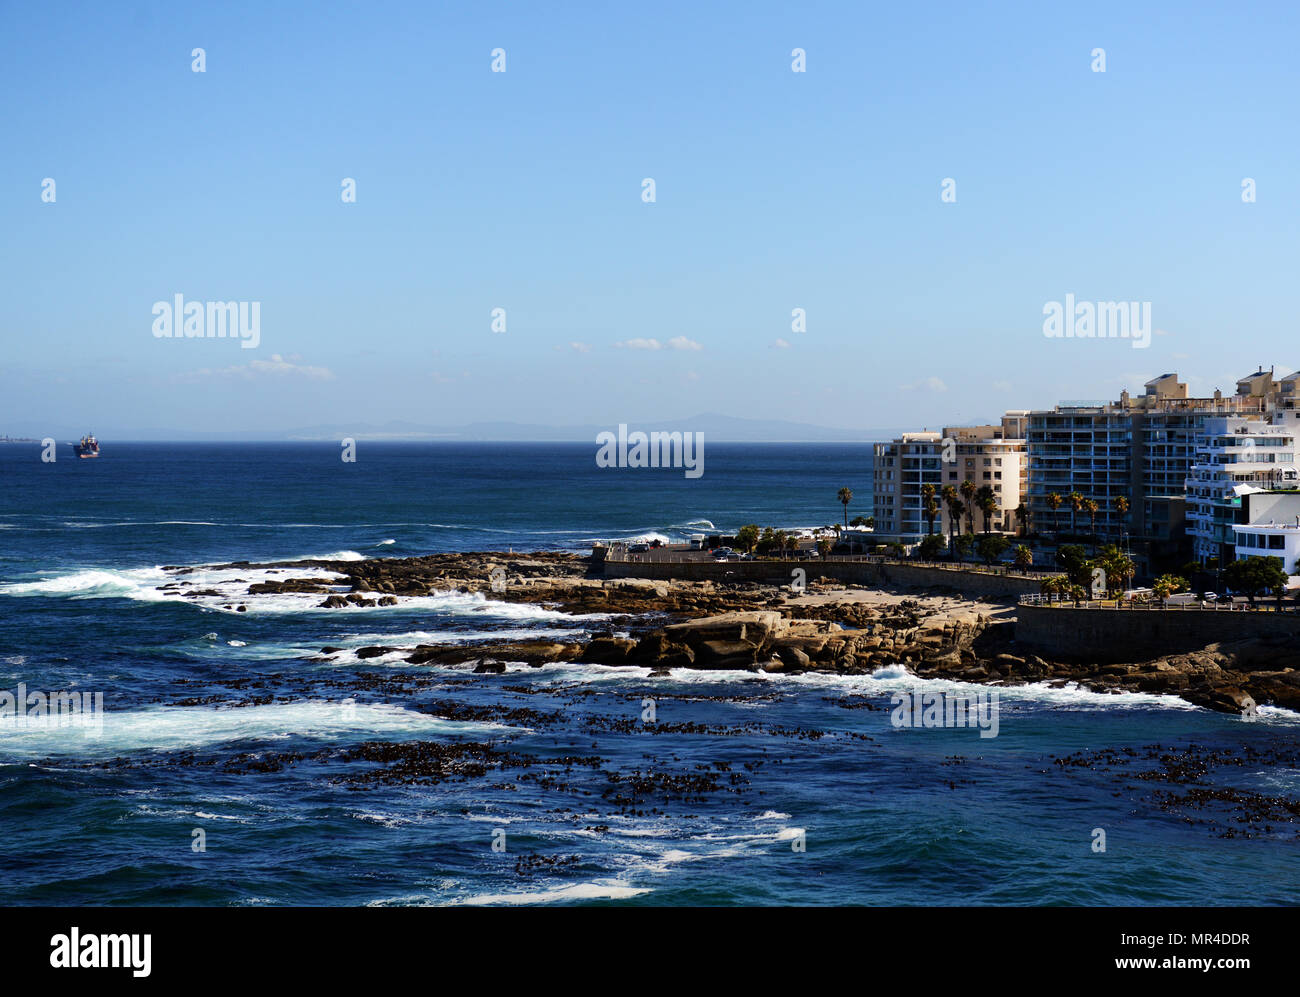 The beautiful coastline of Cape Town, South Africa. Stock Photo